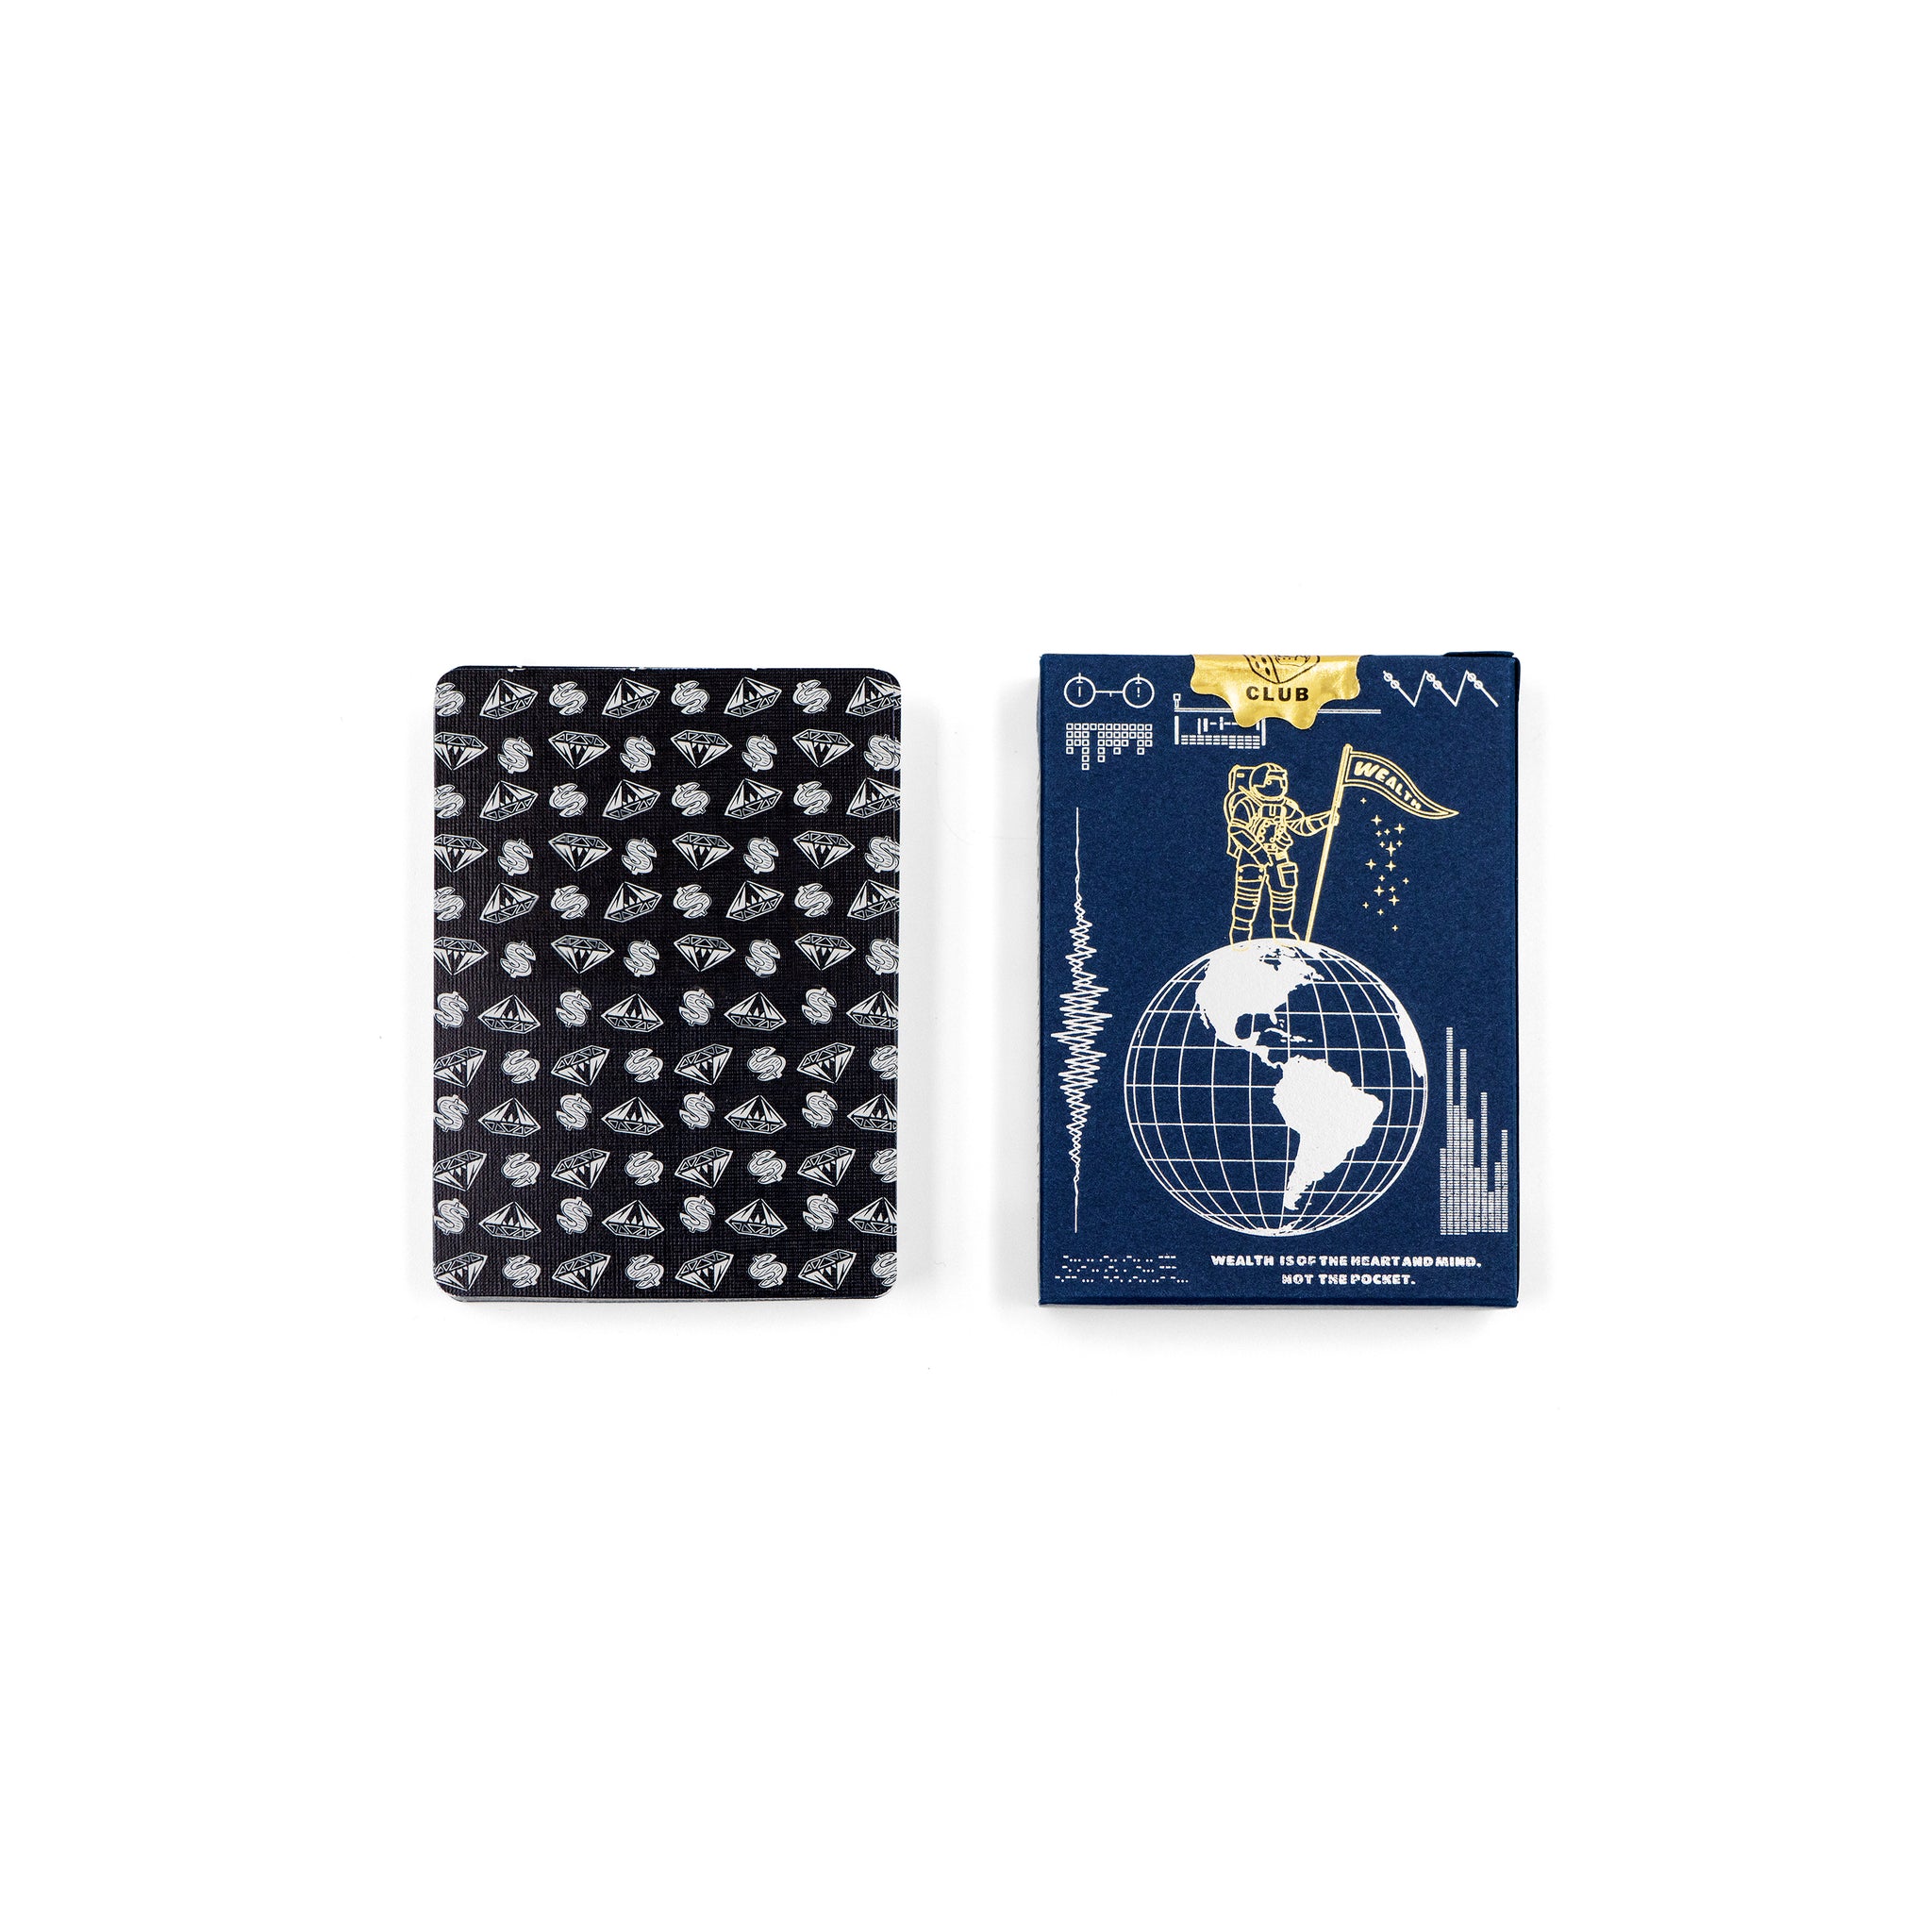 BBC X THEORY 11 PLAYING CARDS